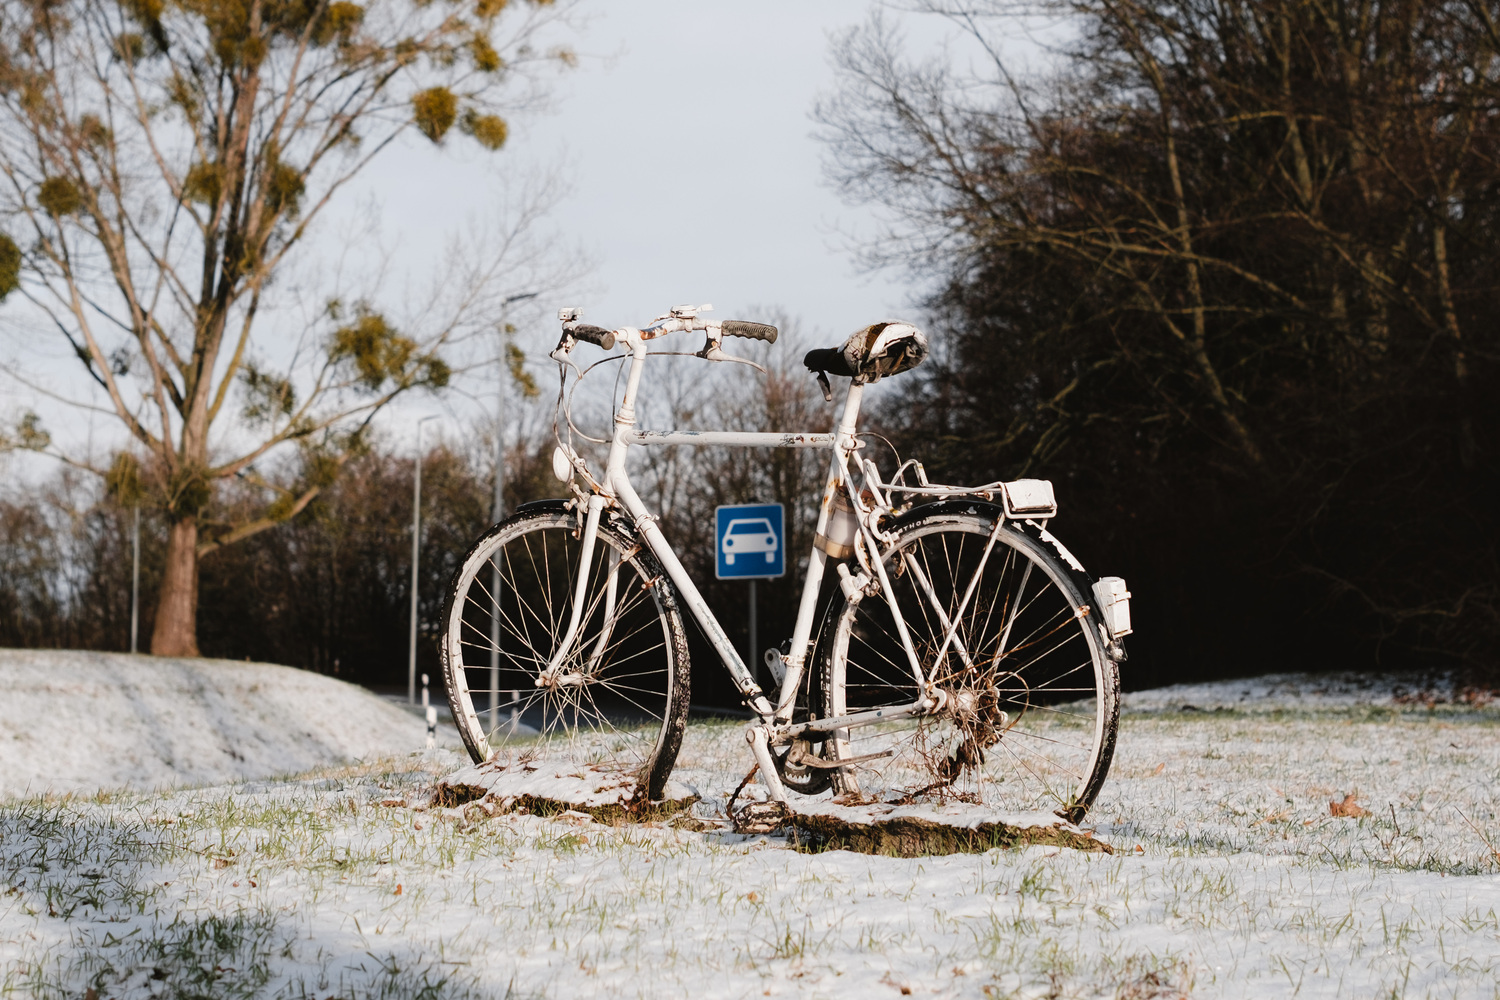 A white bicycle standing on a snowy meadow. The bicycle frames a blue road sign, which displays a car.